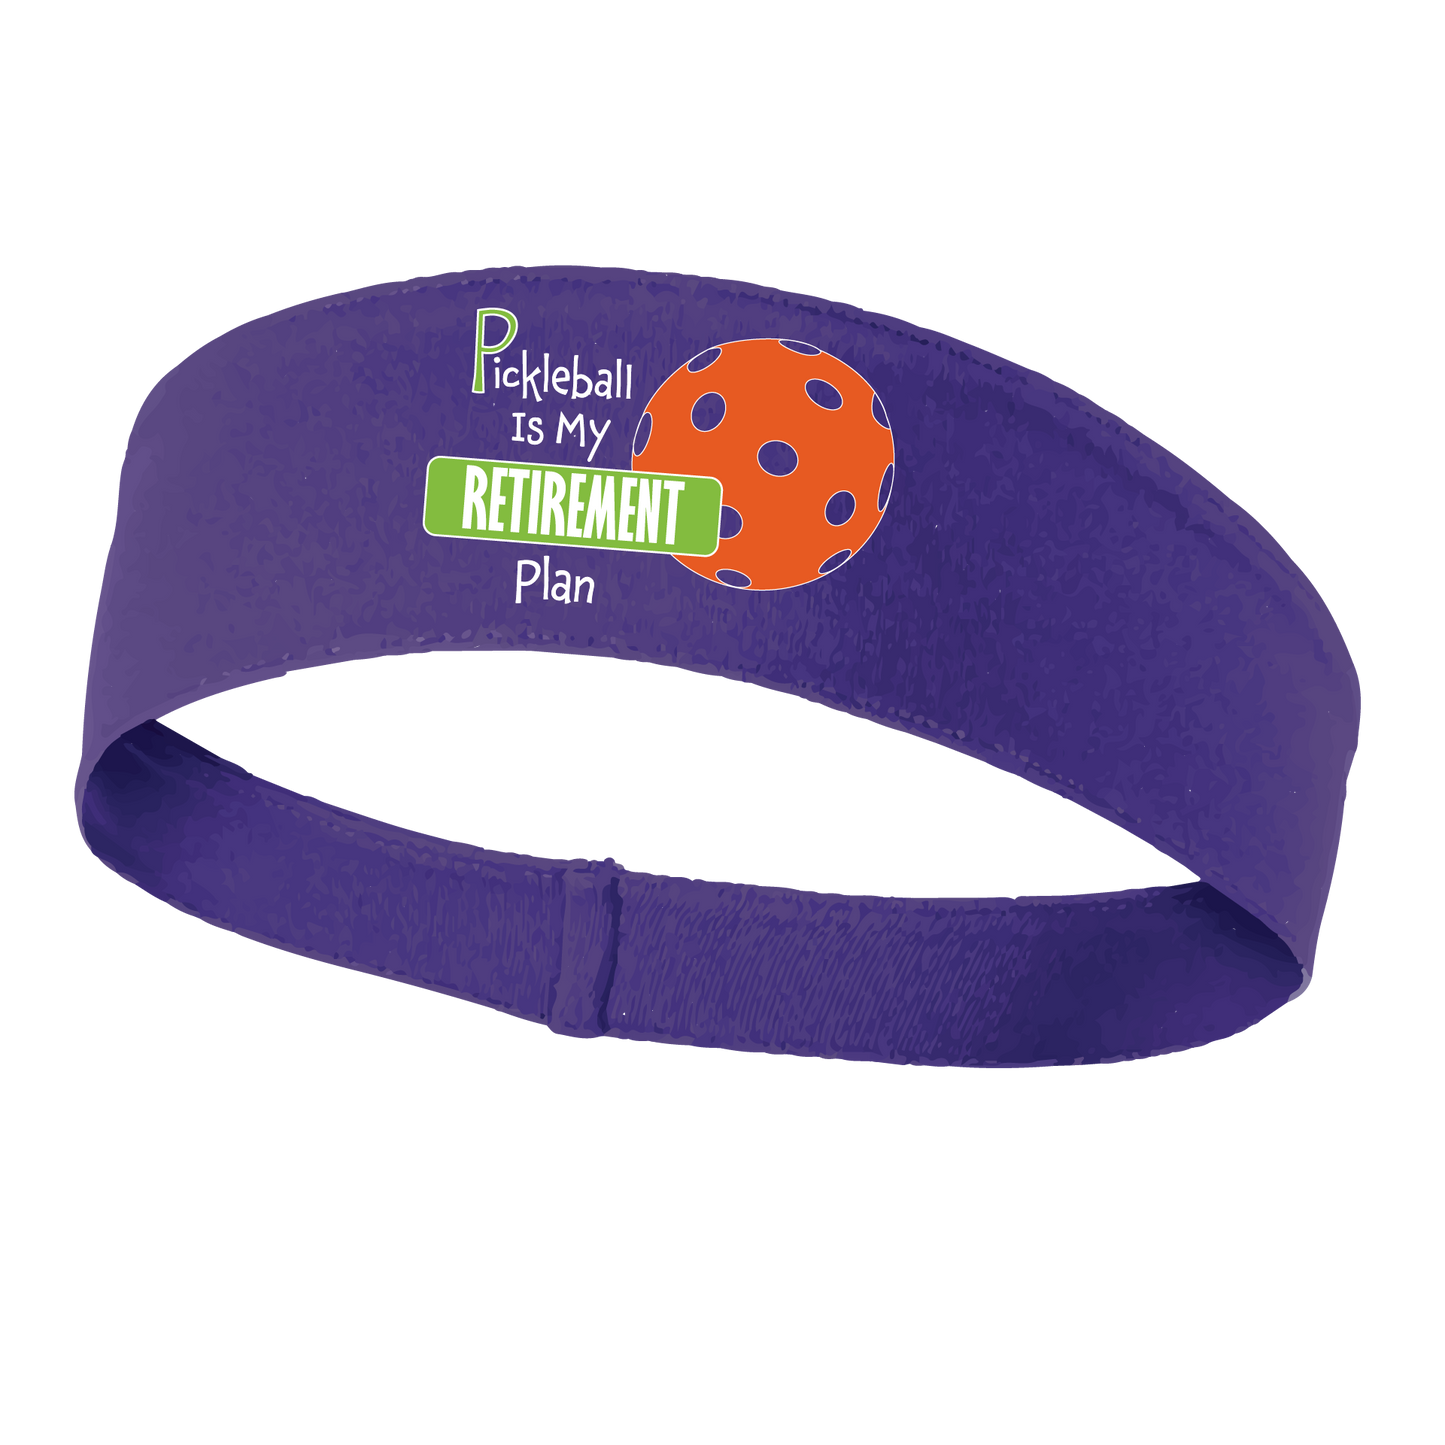 Pickleball Headband Design: Pickleball Retirement  This fun, pickleball designed, moisture-wicking headband narrows in the back to fit more securely. Single-needle top-stitched edging. These headbands come in a variety of colors. Truly shows your love for the sport of pickleball!!